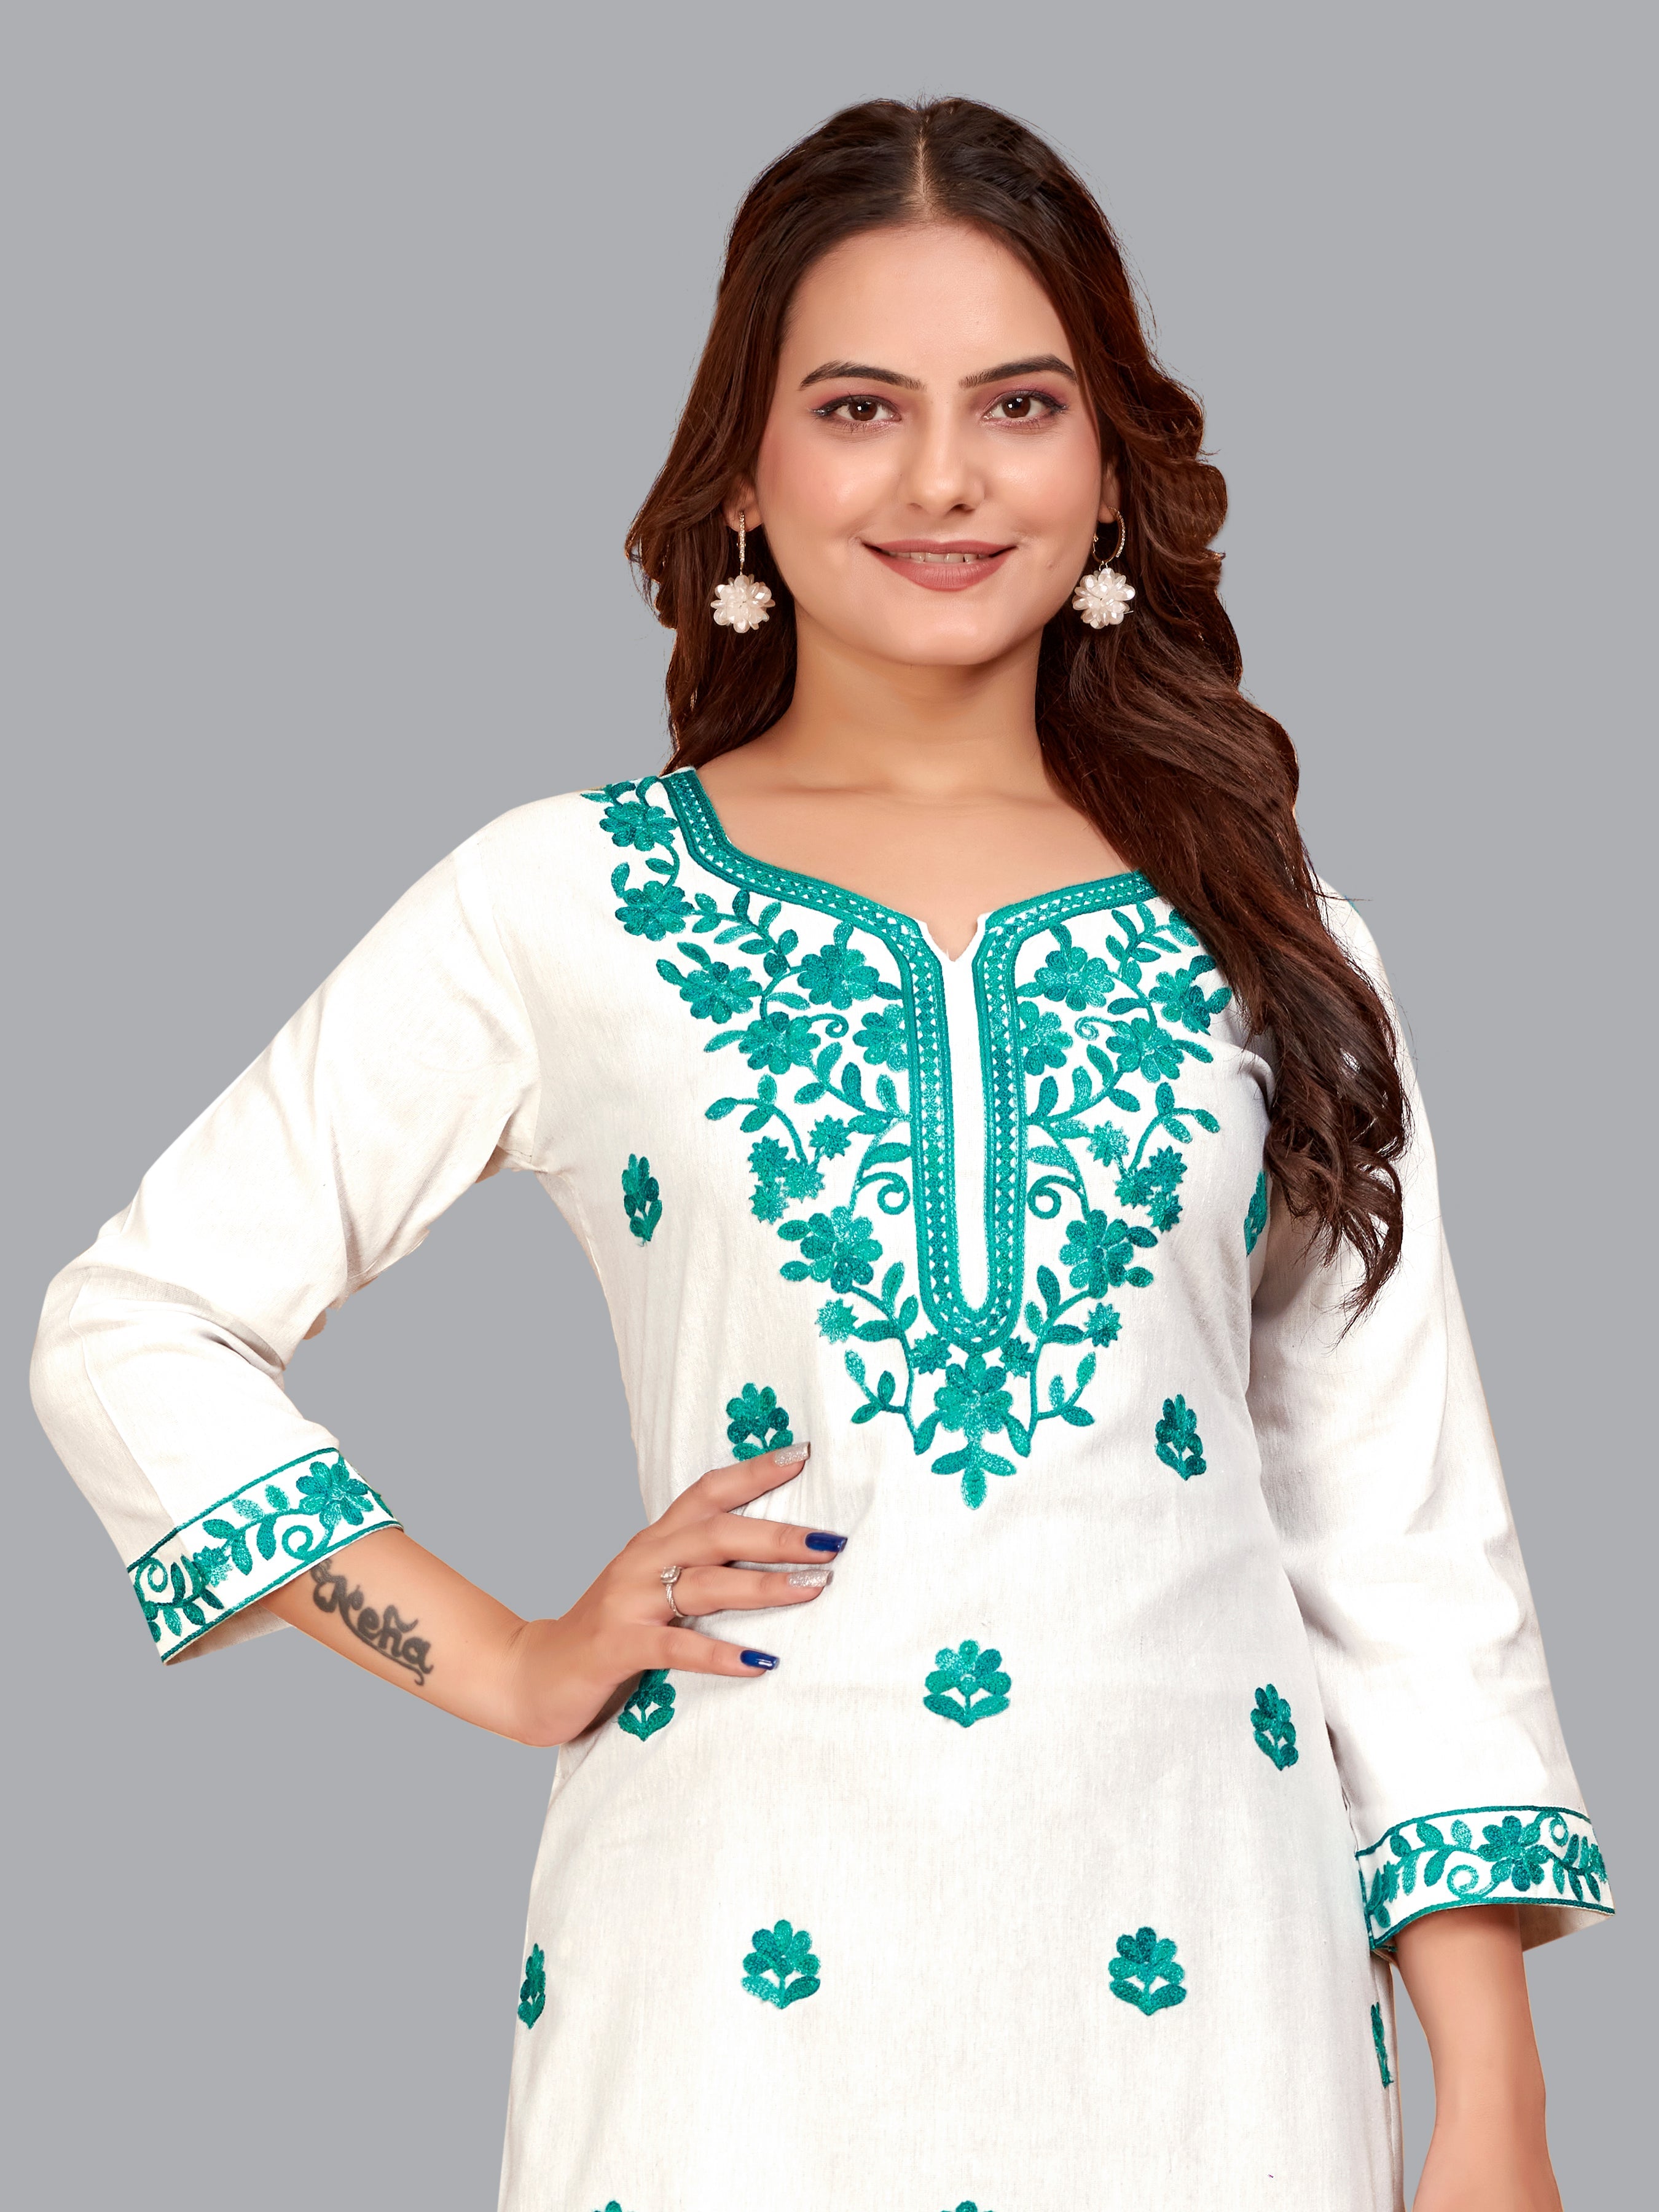 White And Blue Embroidered Cotton Kurti Top For Women